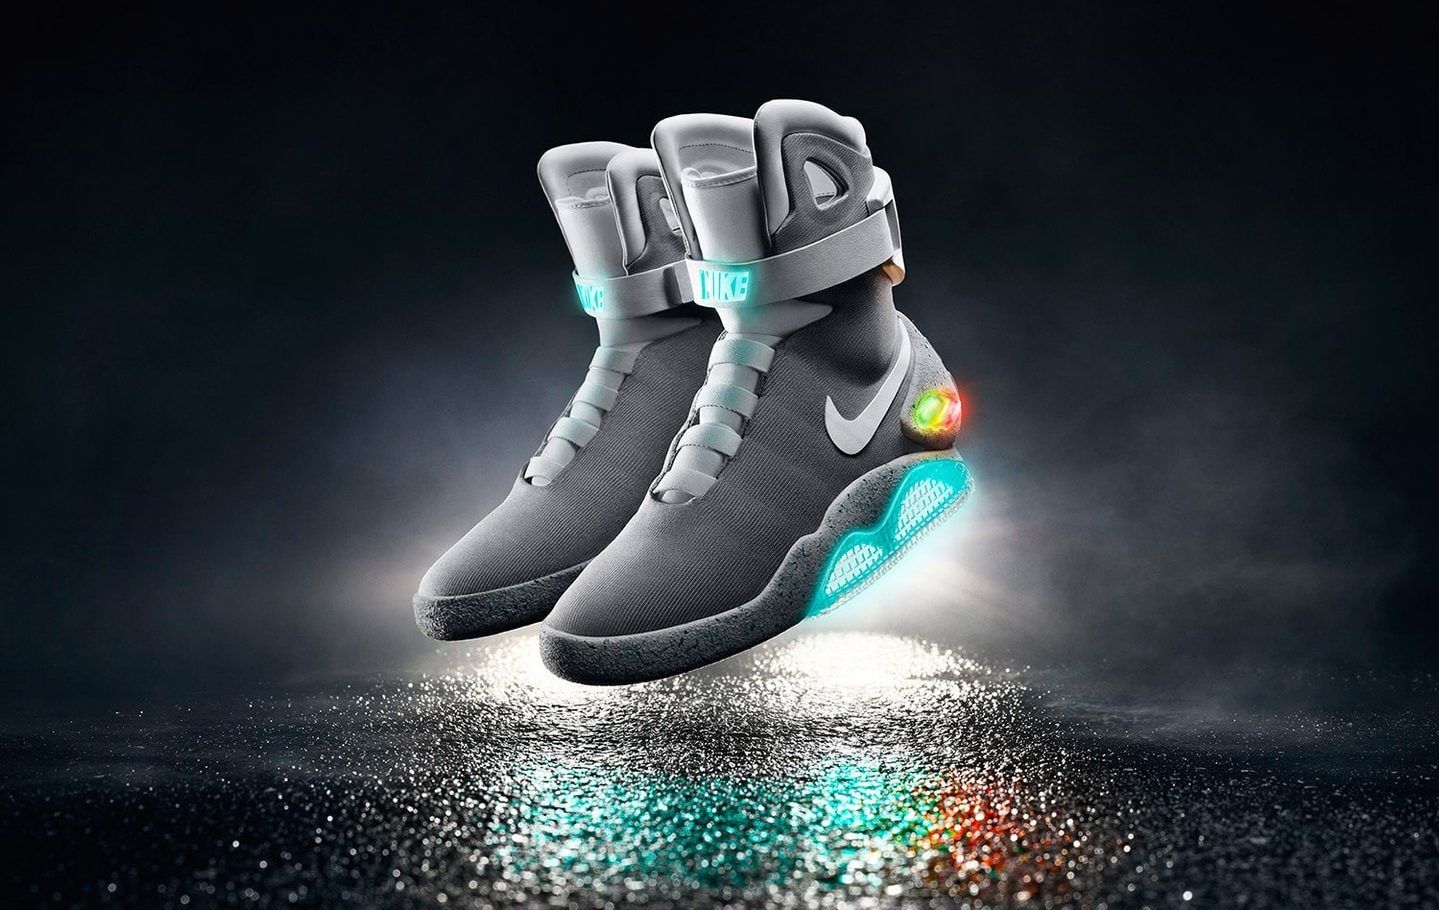 Step into the future with these 5 'Smart Sneakers' backed by science